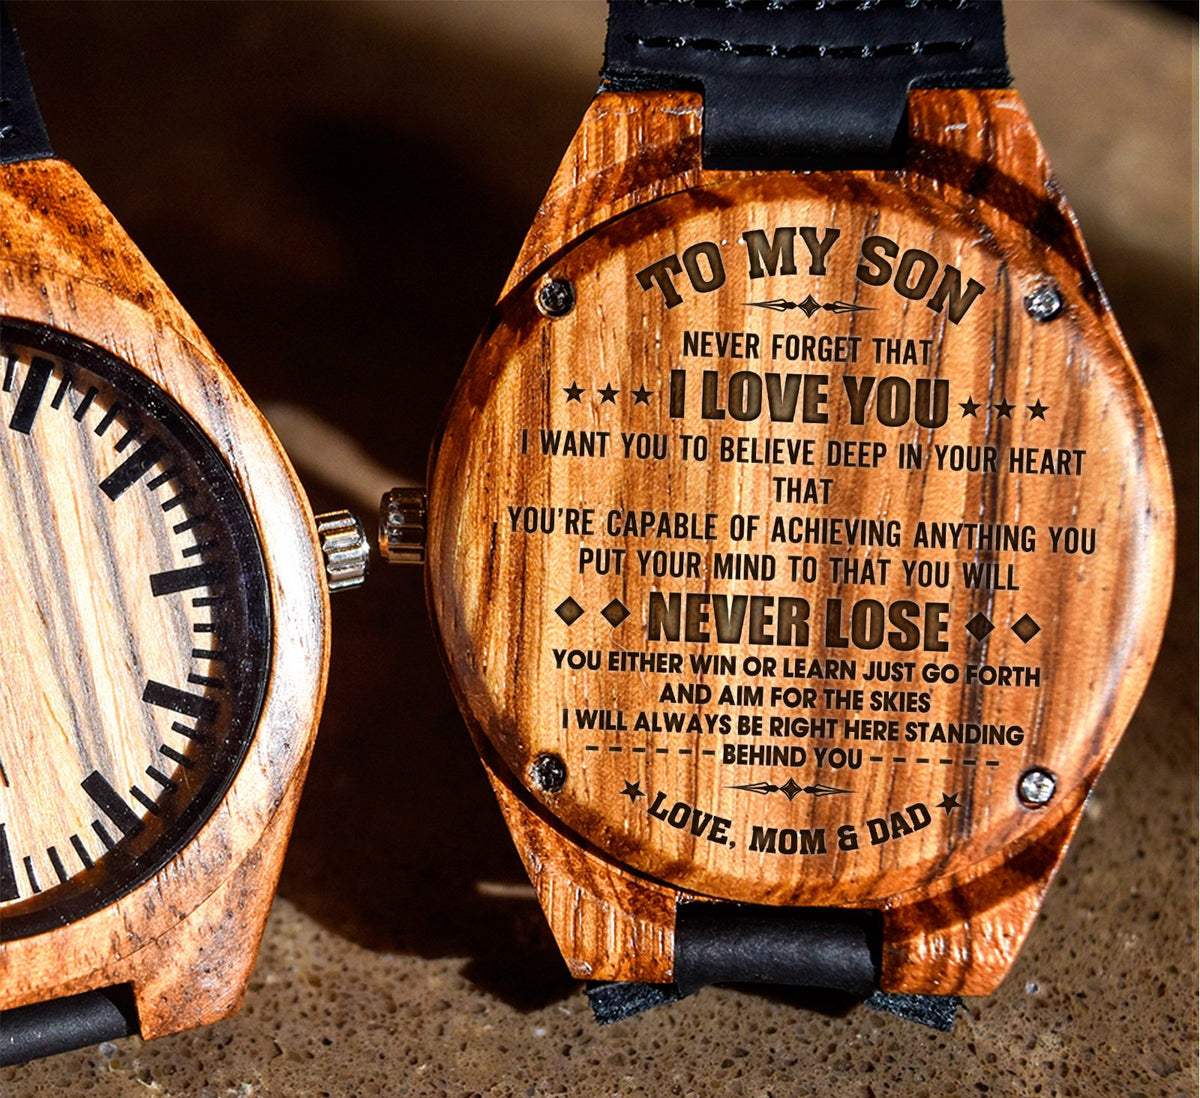 To My Son - You&#39;re Capable of Achieving Anything You Put Your Mind to That You Will Never Lose - Wooden Watch